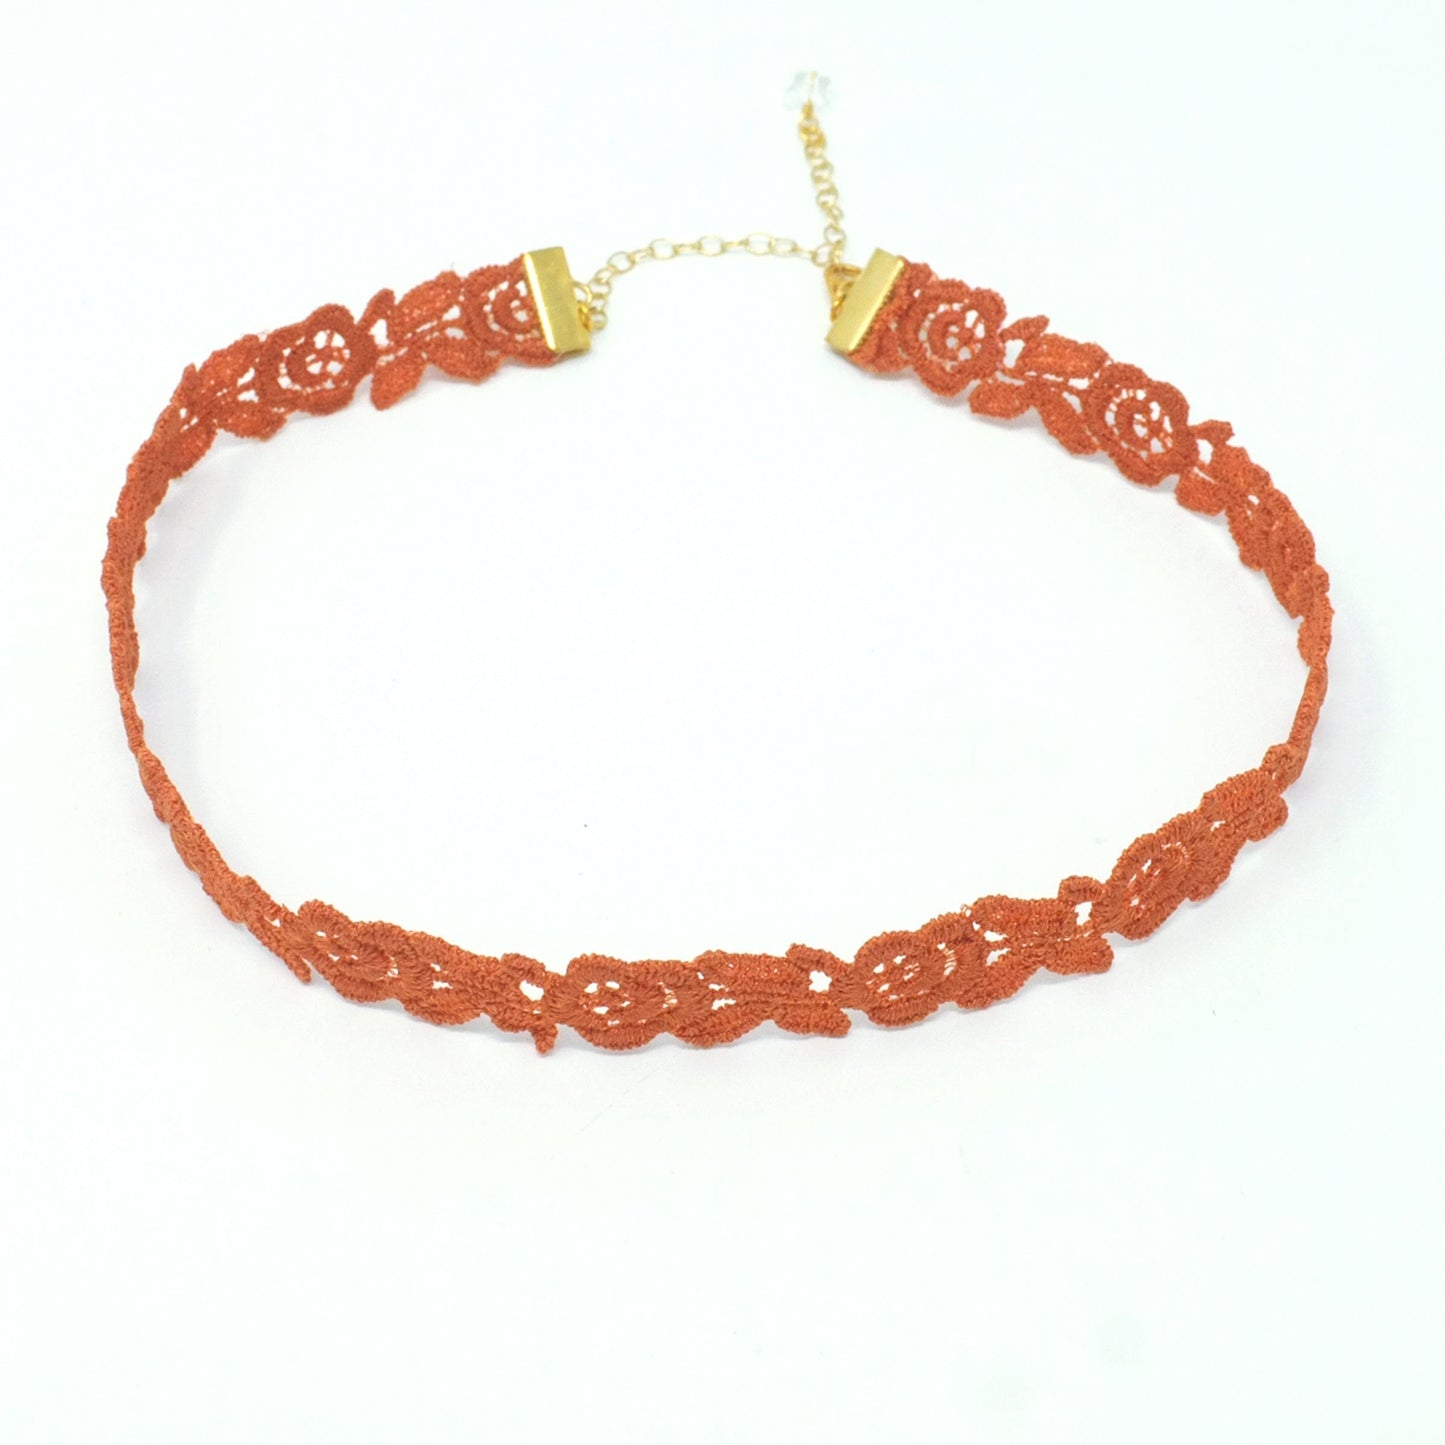 lacy rose choker in dark orange color with gold clasp